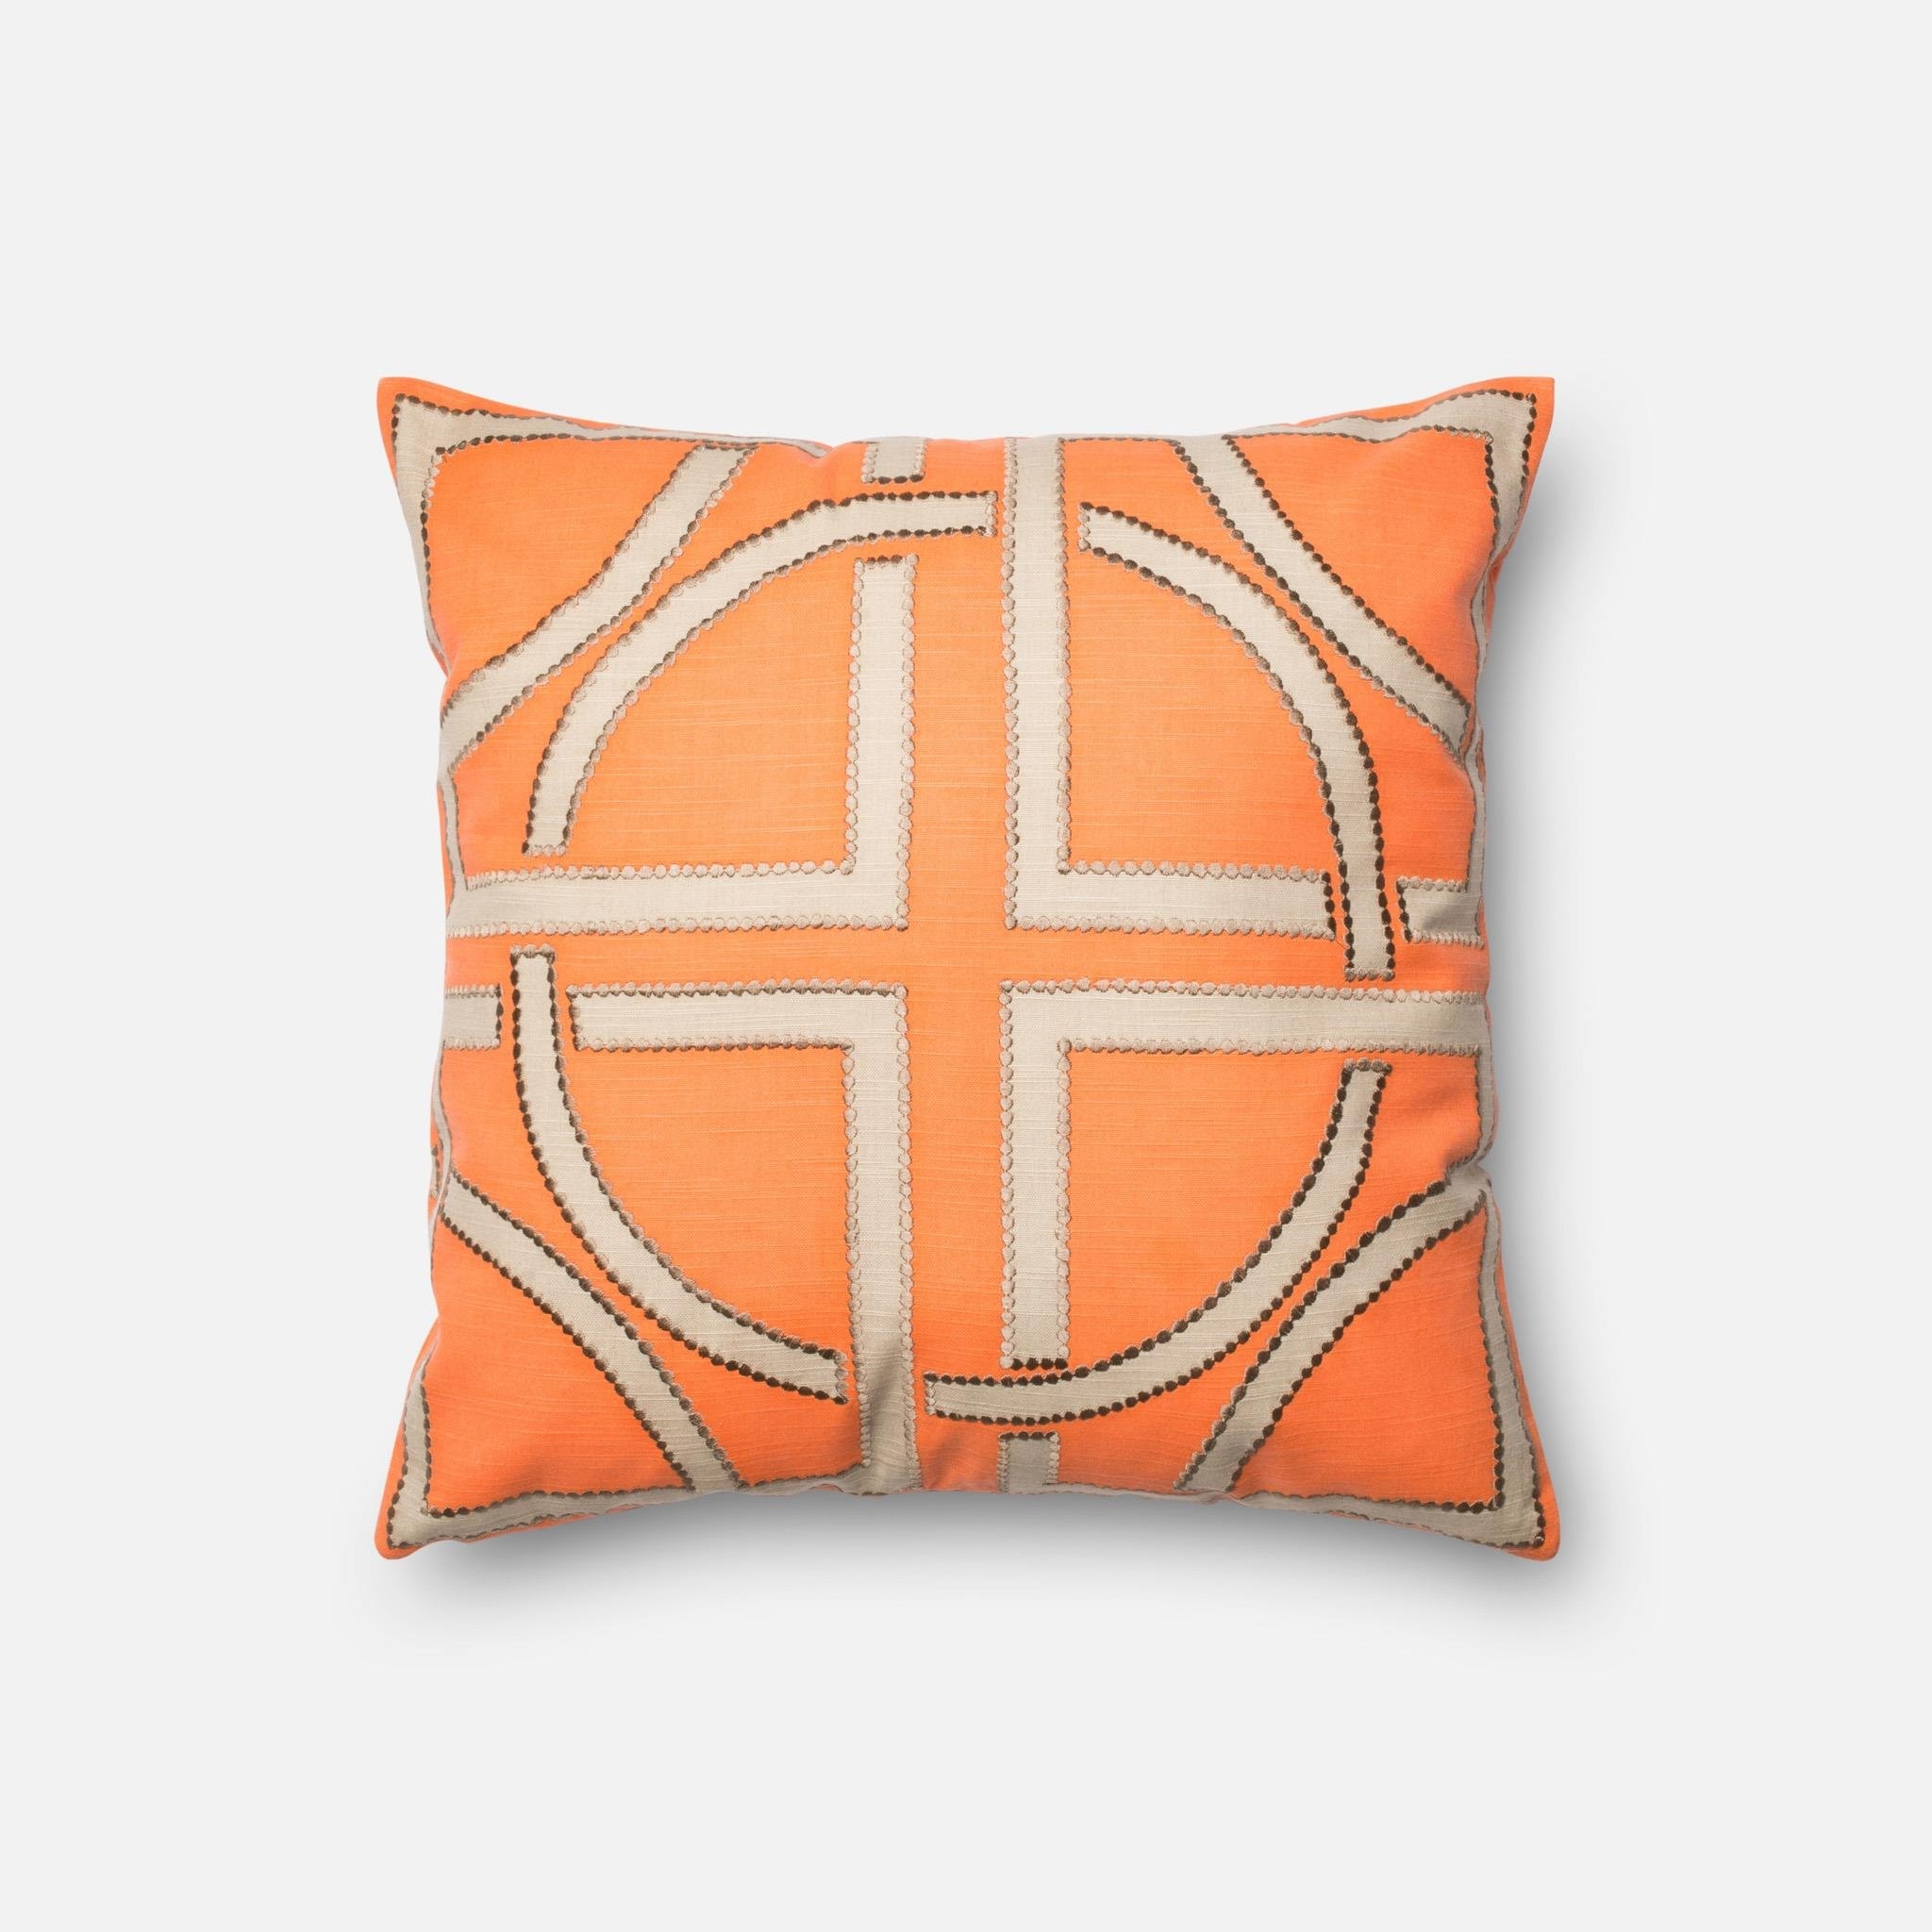 PILLOWS - ORANGE / BEIGE - 18" X 18" Cover Only - Image 0